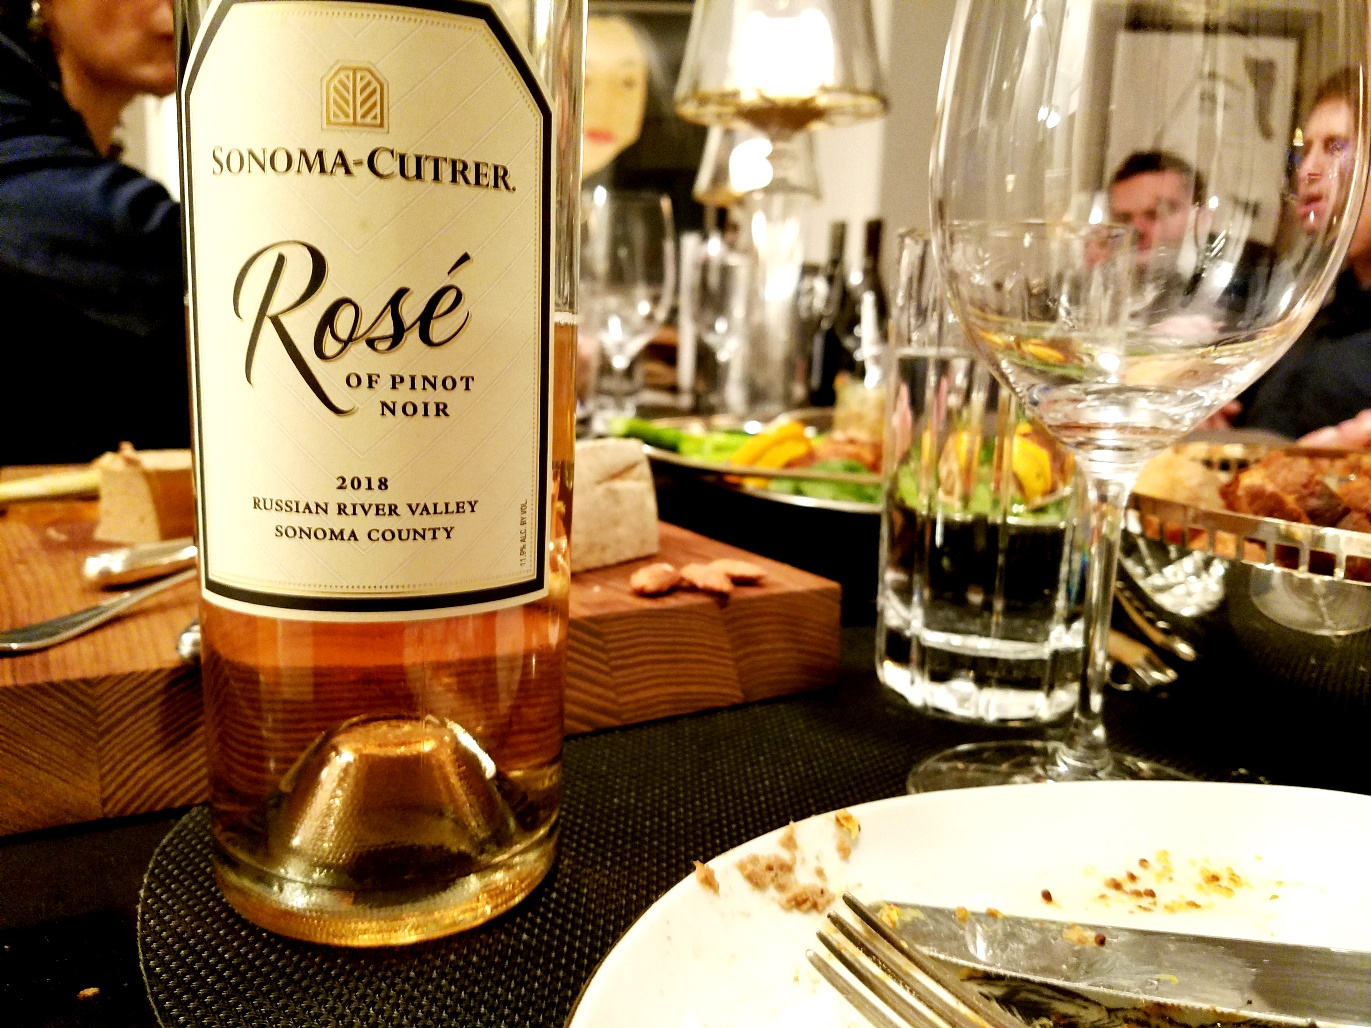 Sonoma-Cutrer, Rosé of Pinot Noir 2018, Russian River Valley, Sonoma County, California, Wine Casual